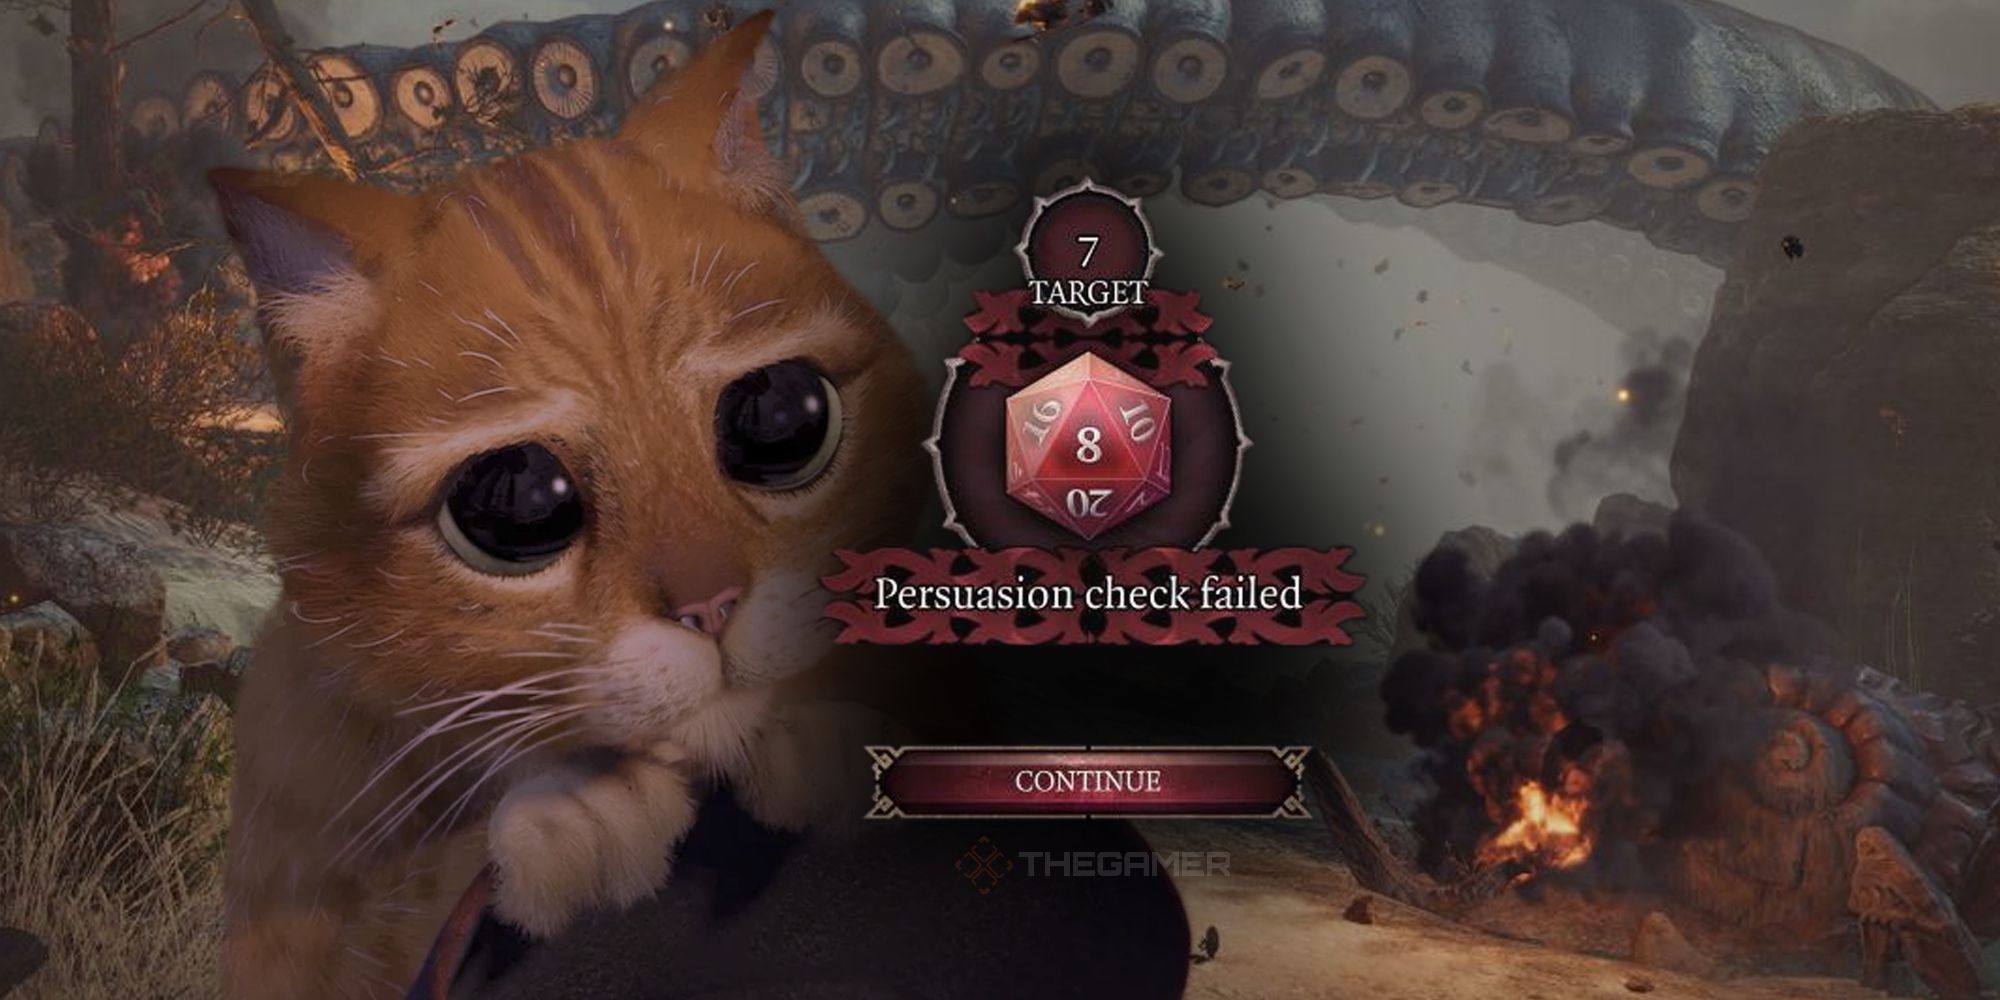 Puss in Boots doing the wide eyes look at the Nautiloid Crash in Baldurs Gate 3 with a failed persuasion check over the top